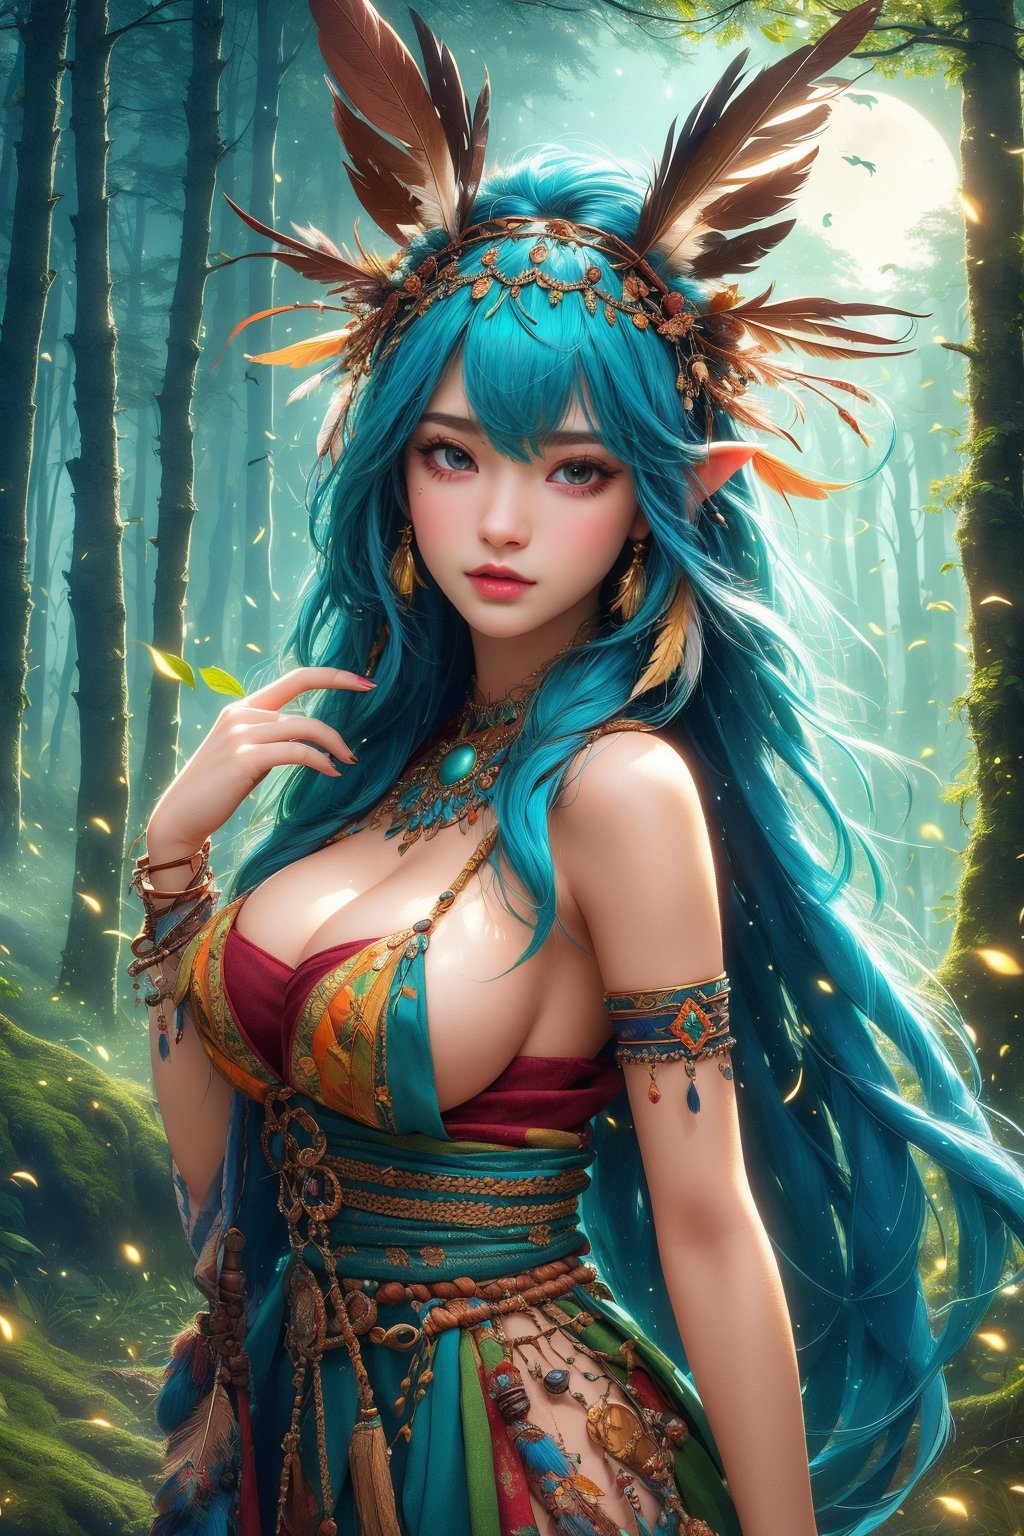 busty and sexy girl, Tribal girl, feather headdress 8k, masterpiece, ultra-realistic, best quality, high resolution, high definition,  the character should be a mischievous forest spirit, LOW-CUT SEXY DRESS, leaves woven into their hair. The background should be a moonlit forest clearing, with fireflies dancing in the air. The overall mood should be mysterious and enchanting, inviting viewers to explore the hidden magic of the woods, TRIBAL GIRL, FEATHER HEADDRESS